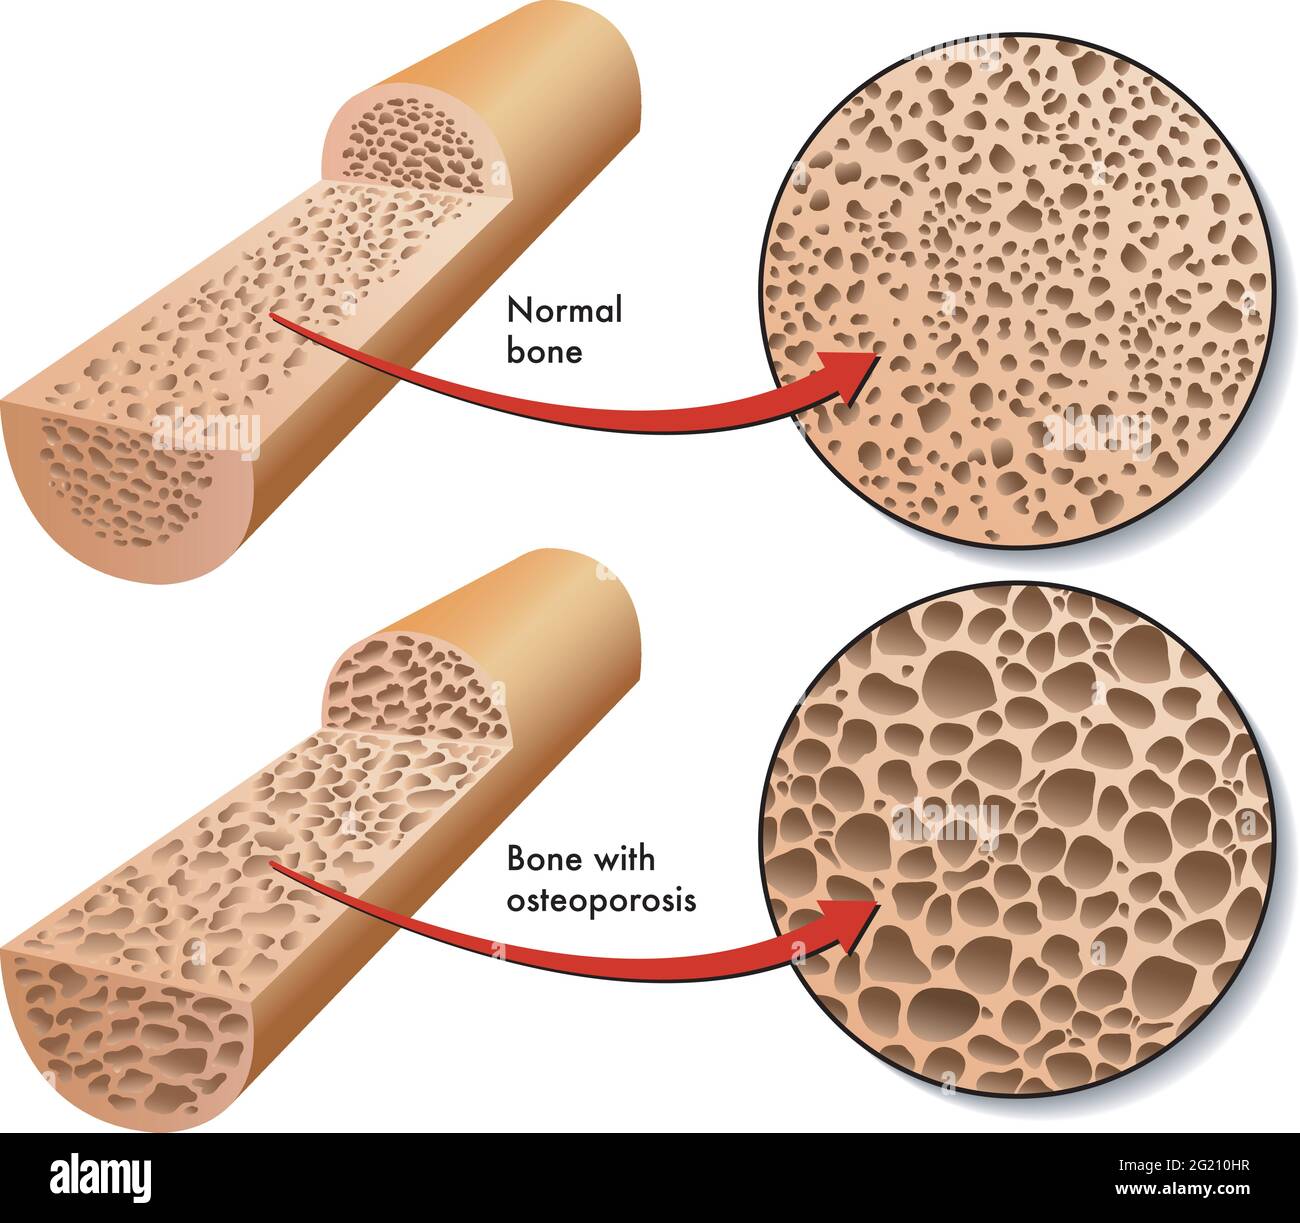 Medical illustration compares the section of a normal bone with the section of a bone affected by osteoporosis. Stock Vector